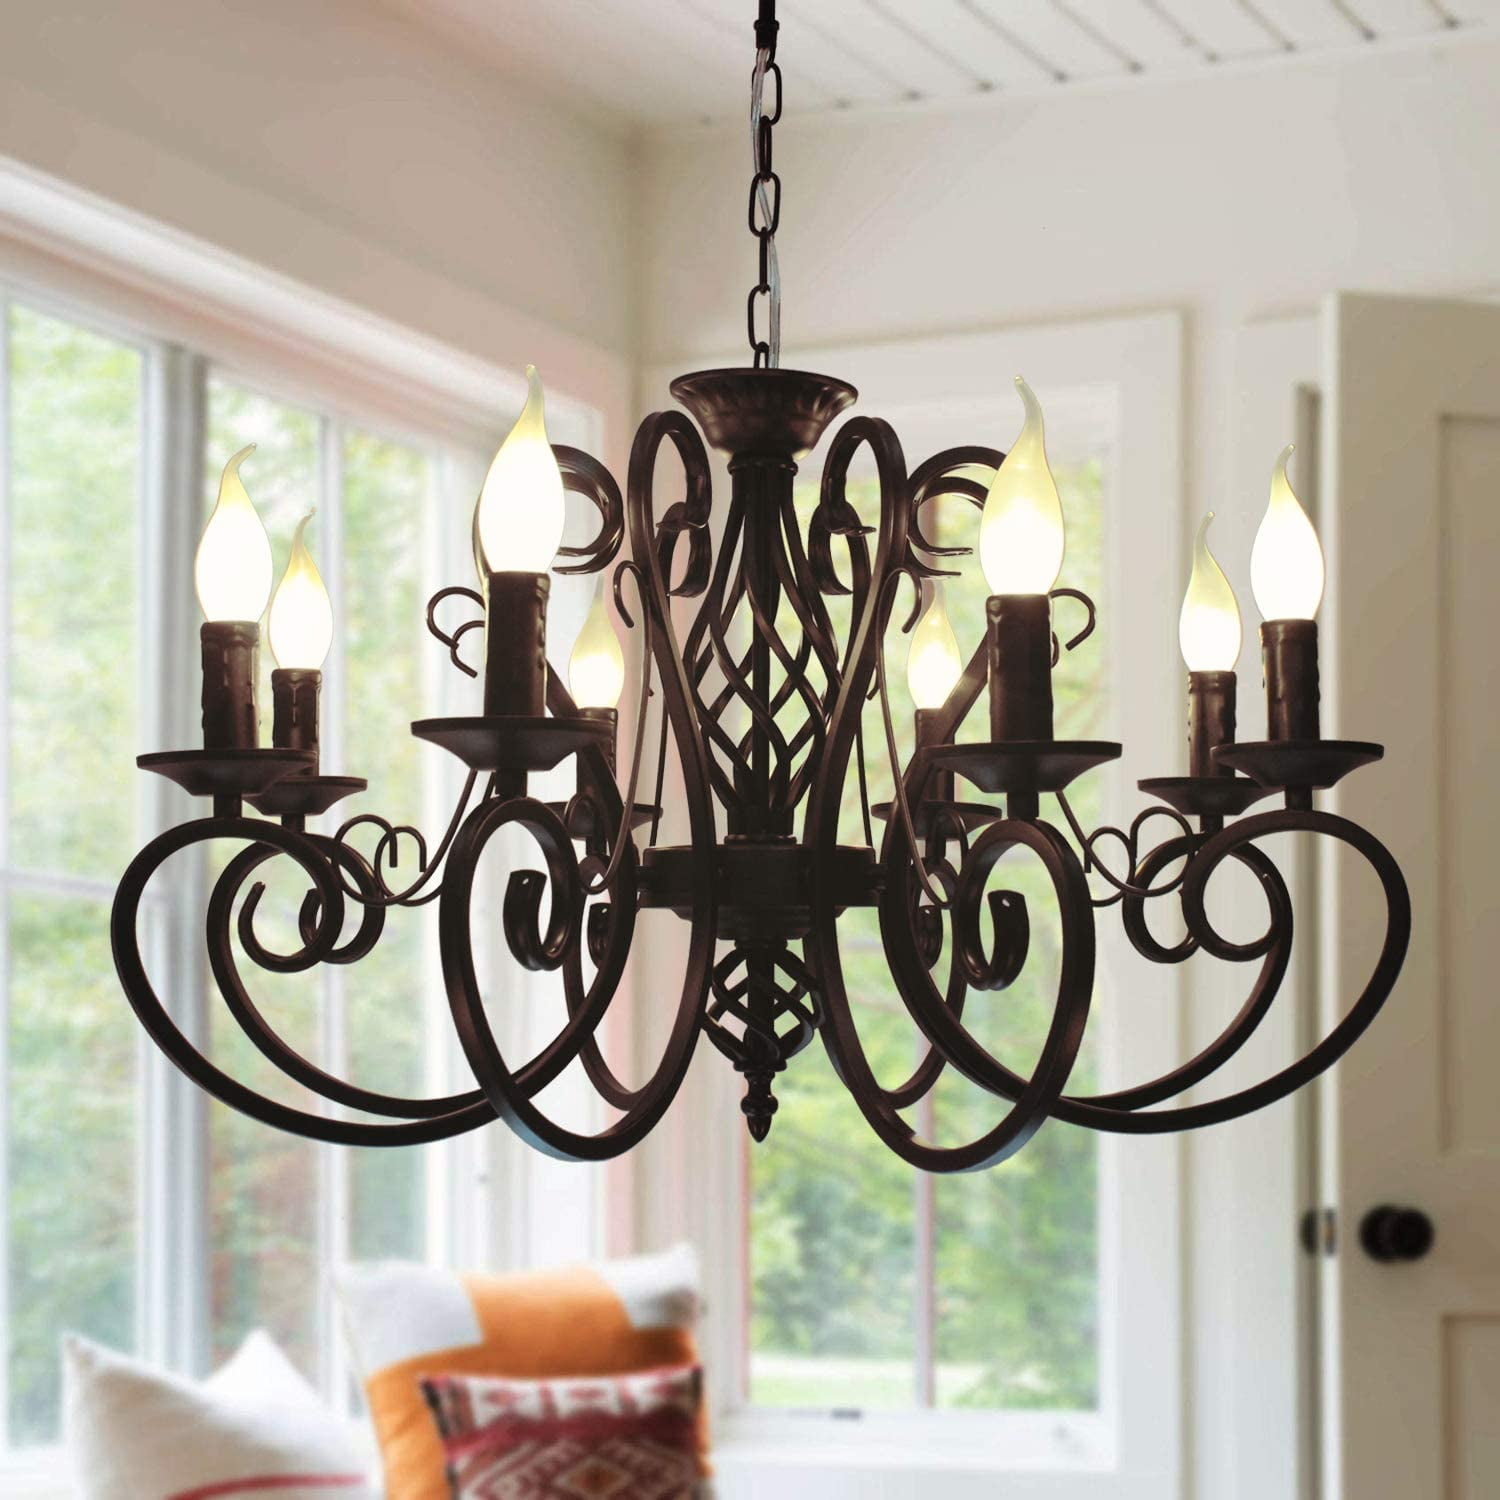 Garwarm French Country Chandeliers 8, Country Light Fixtures For Living Room